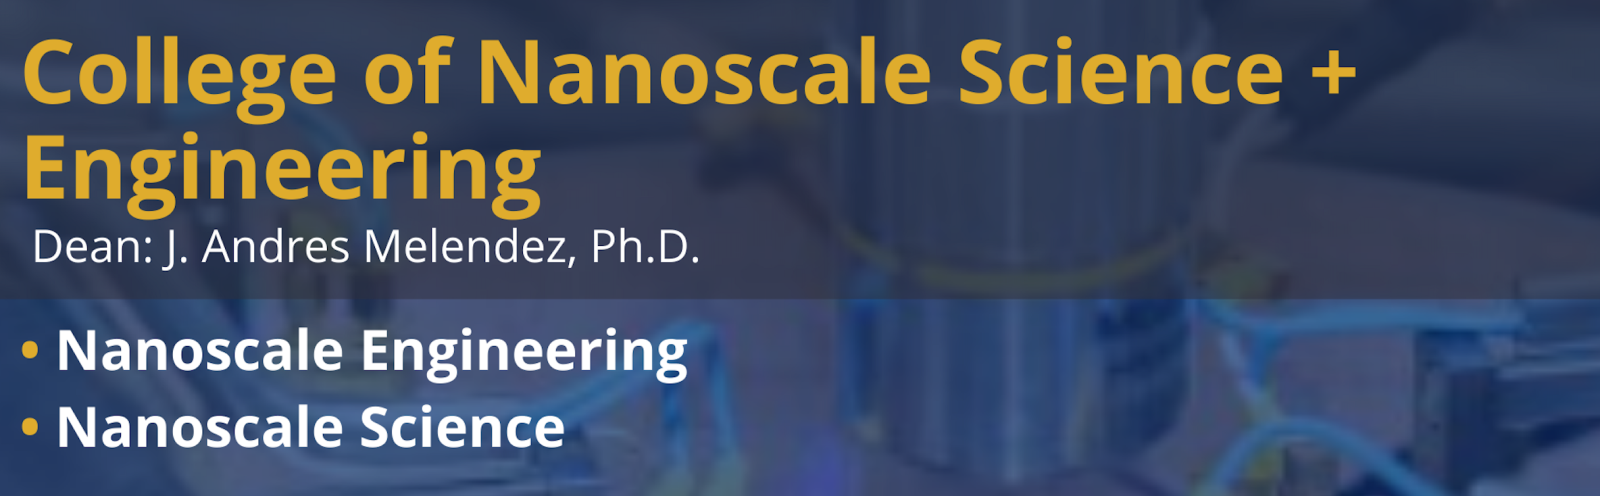 College of Nanoscale Science + Engineering - Dean: J. Andres Melendez, Ph.D. - Nanoscale Engineering, Nanoscale Science